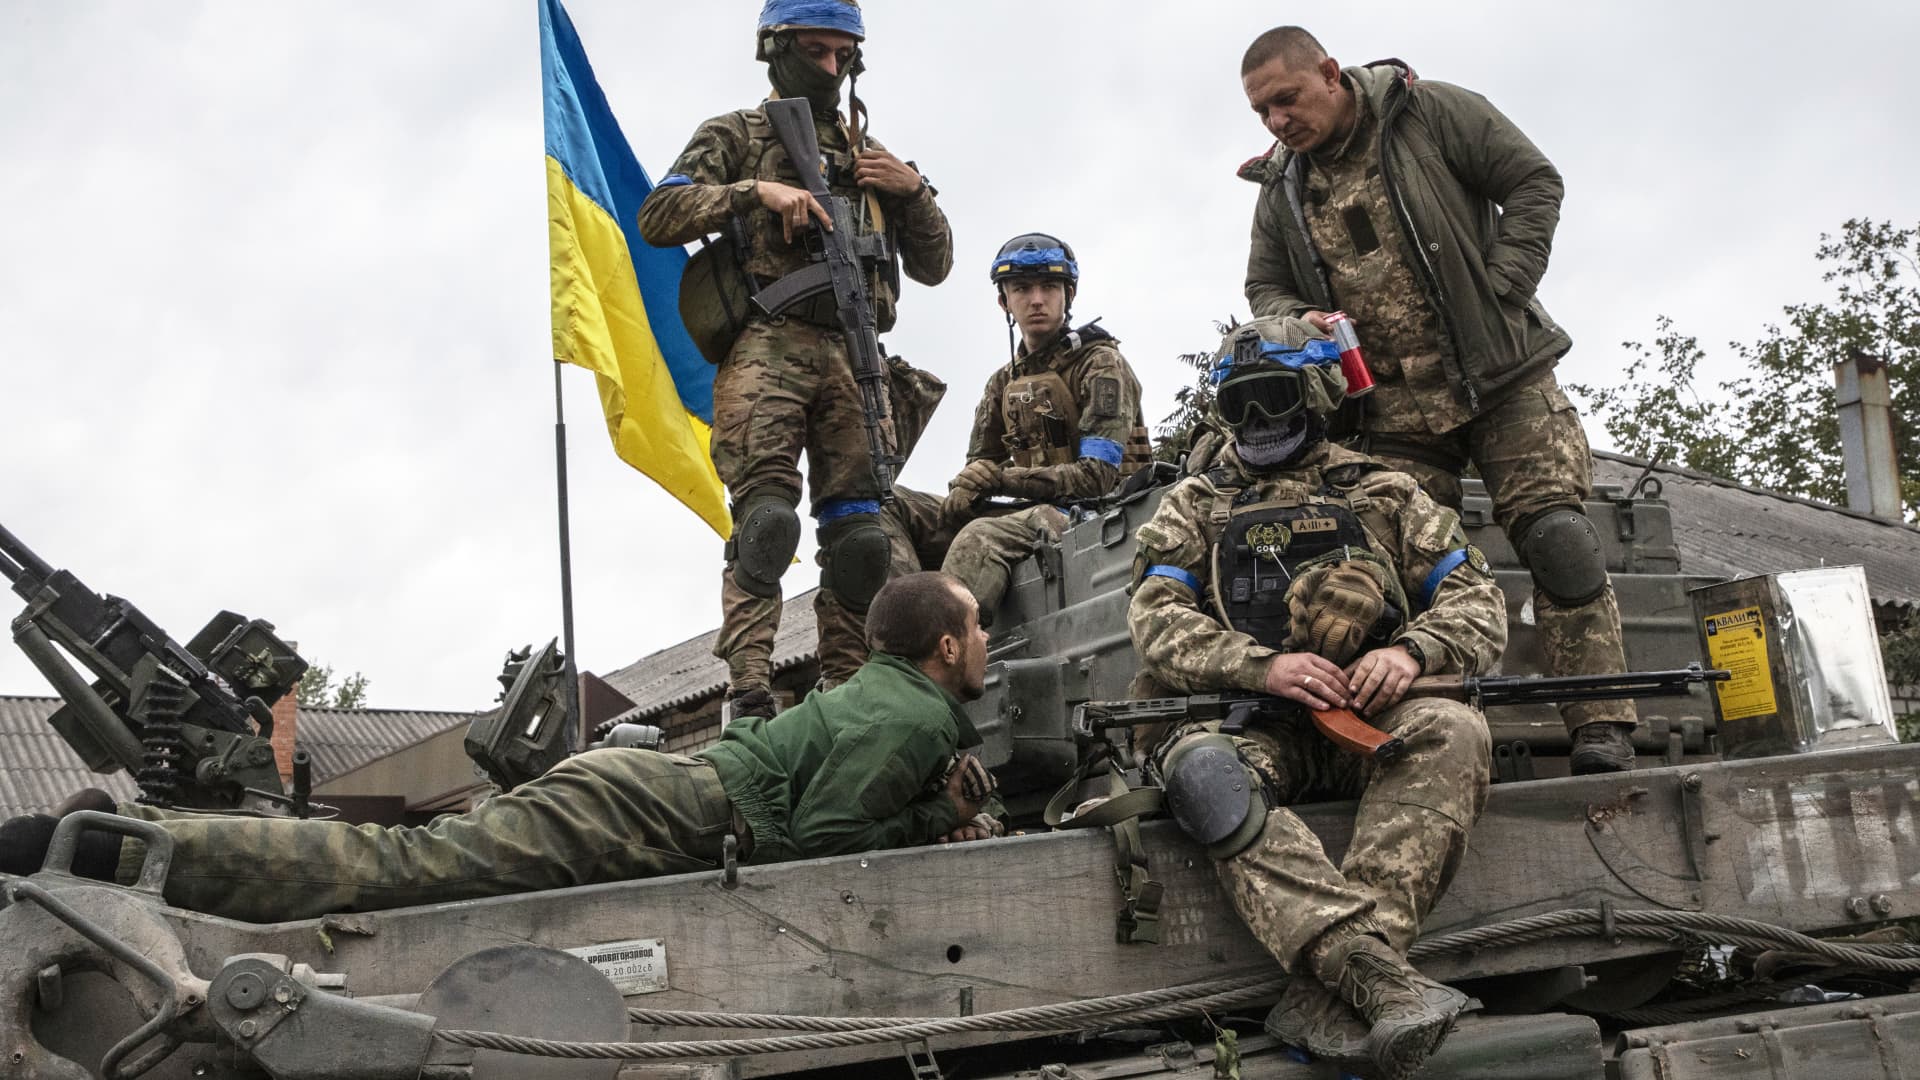 A Russian soldier, taken prisoner, on a tank with Ukrainian soldiers after the city was recaptured from Russian forces on September 11,2022 in Izyum, Ukraine. A Ukrainian counteroffensive has made significant advances in the east of Ukraine taking back land that have been under Russian control.